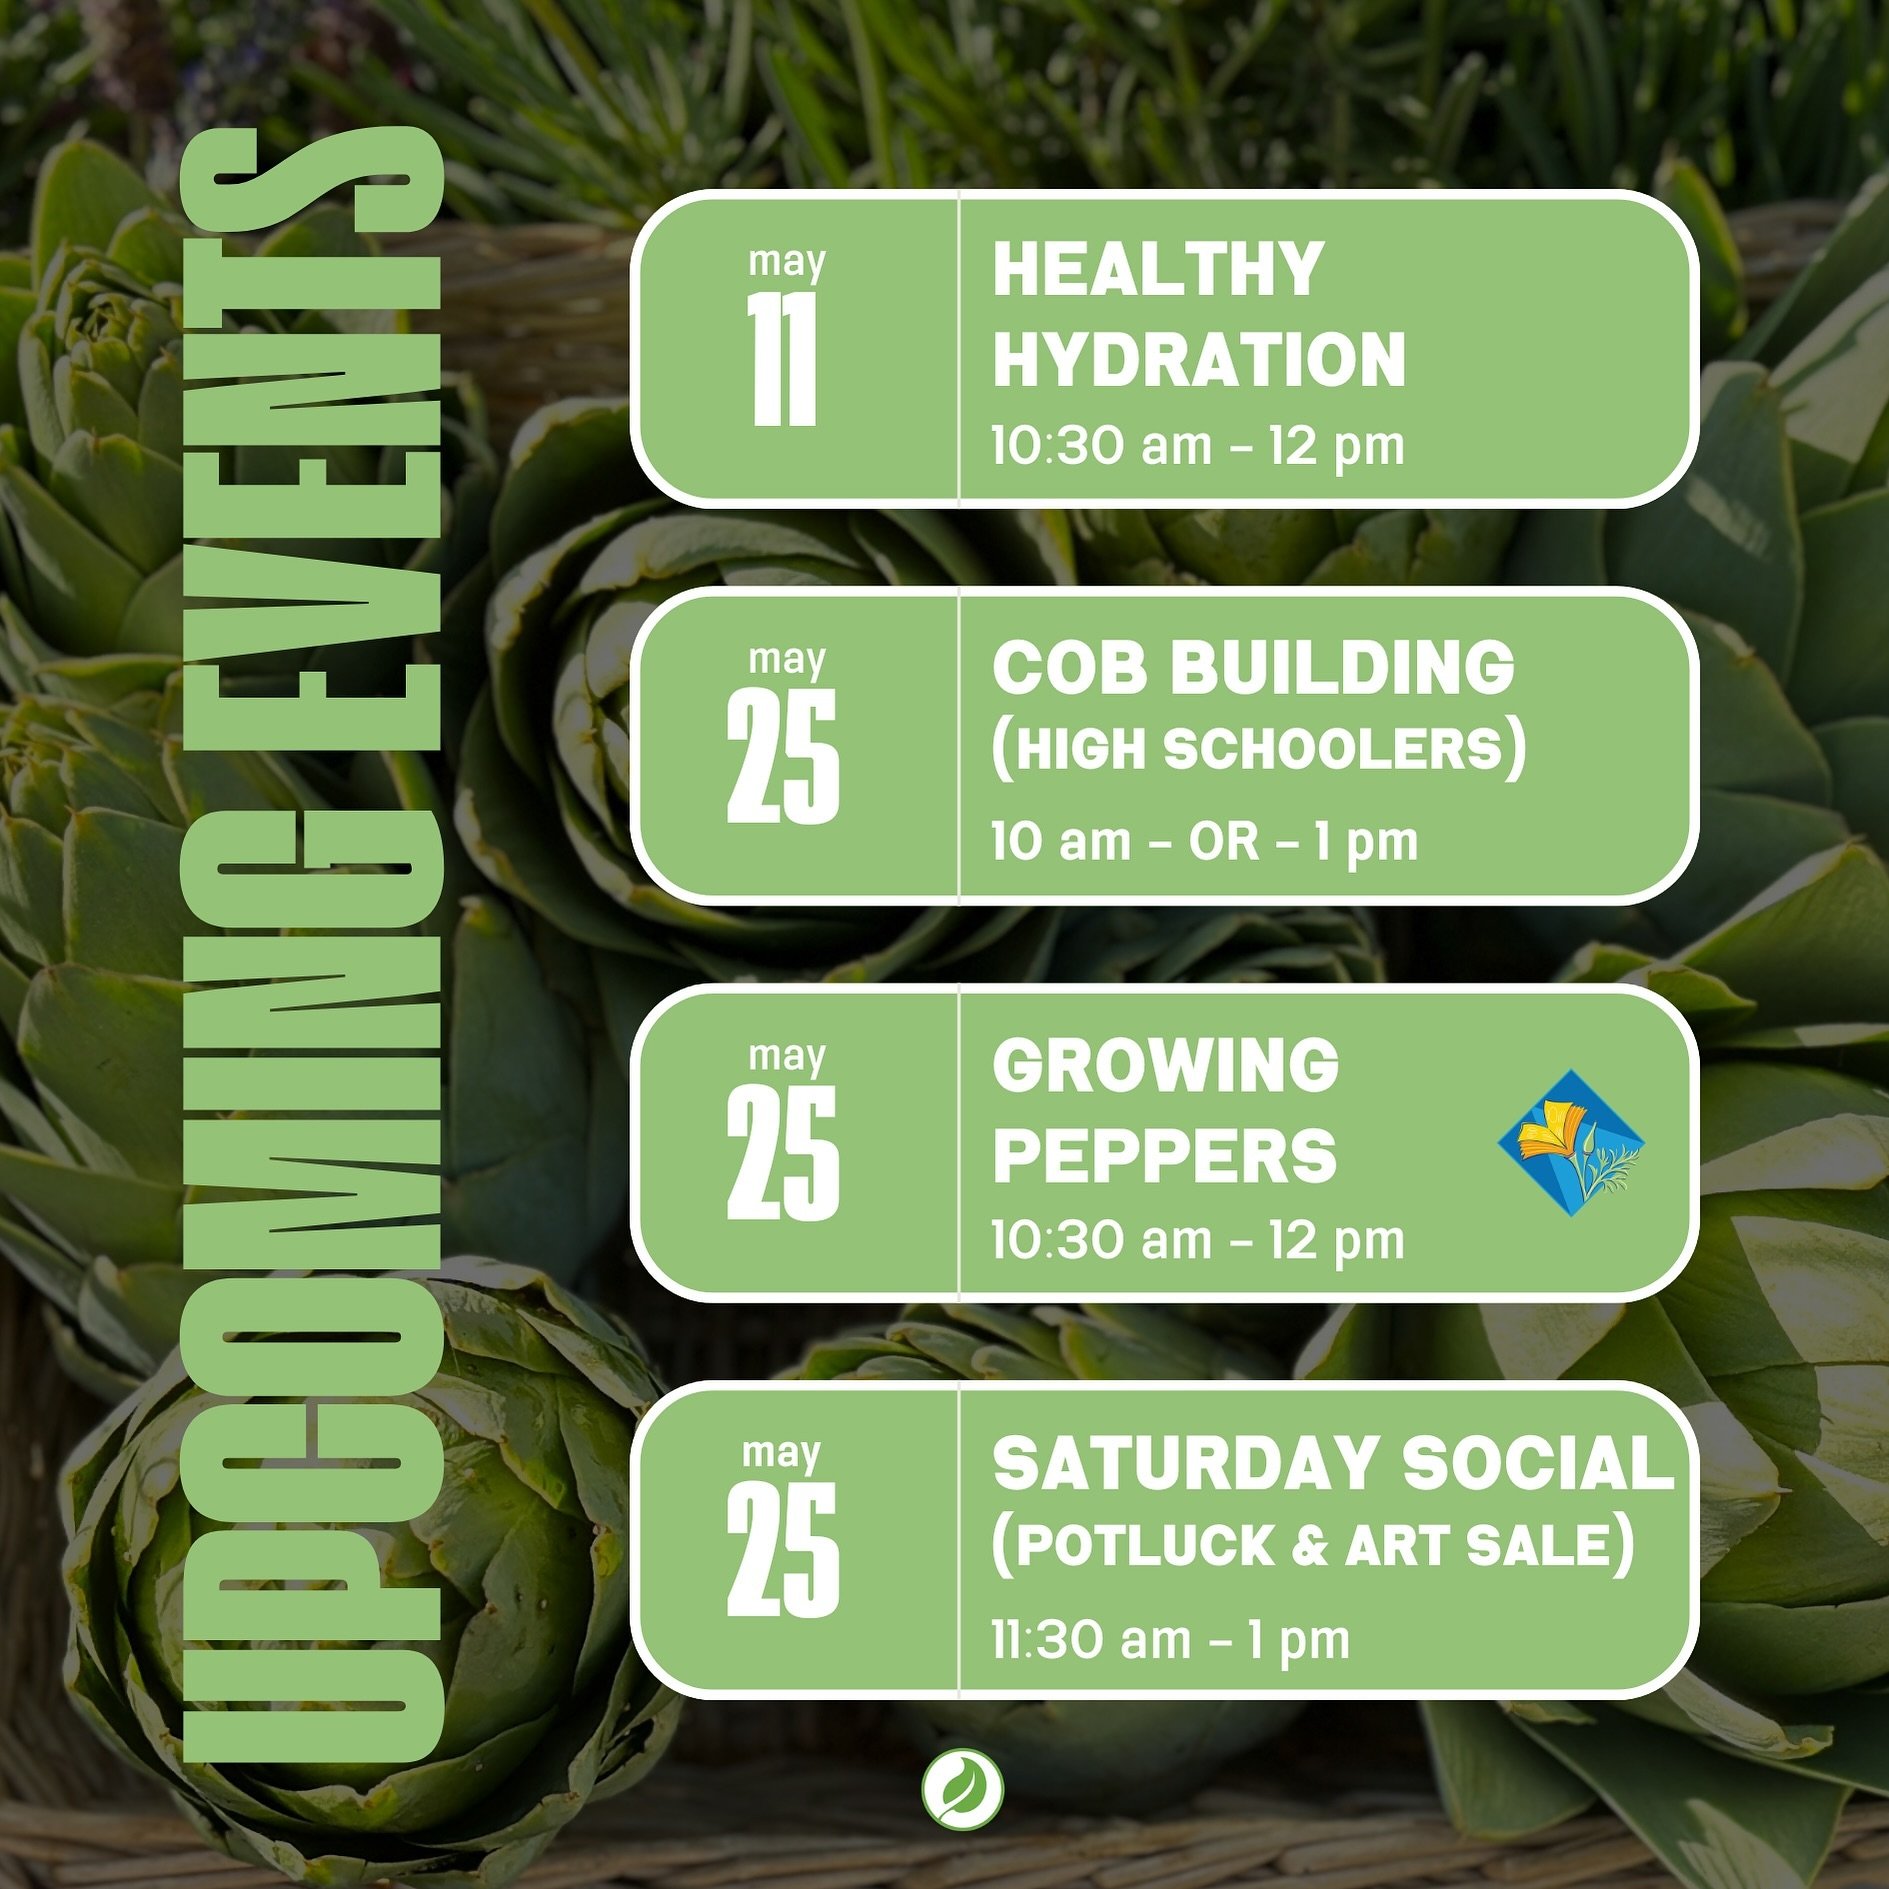 Upcoming events this month! Sign up on the Events page on our website: 

🌱 learn how to use herbs and fresh fruit to make healthy hydrating drinks

🌱 learn to build a cob bench using natural building materials. This workshop is being offered for fr